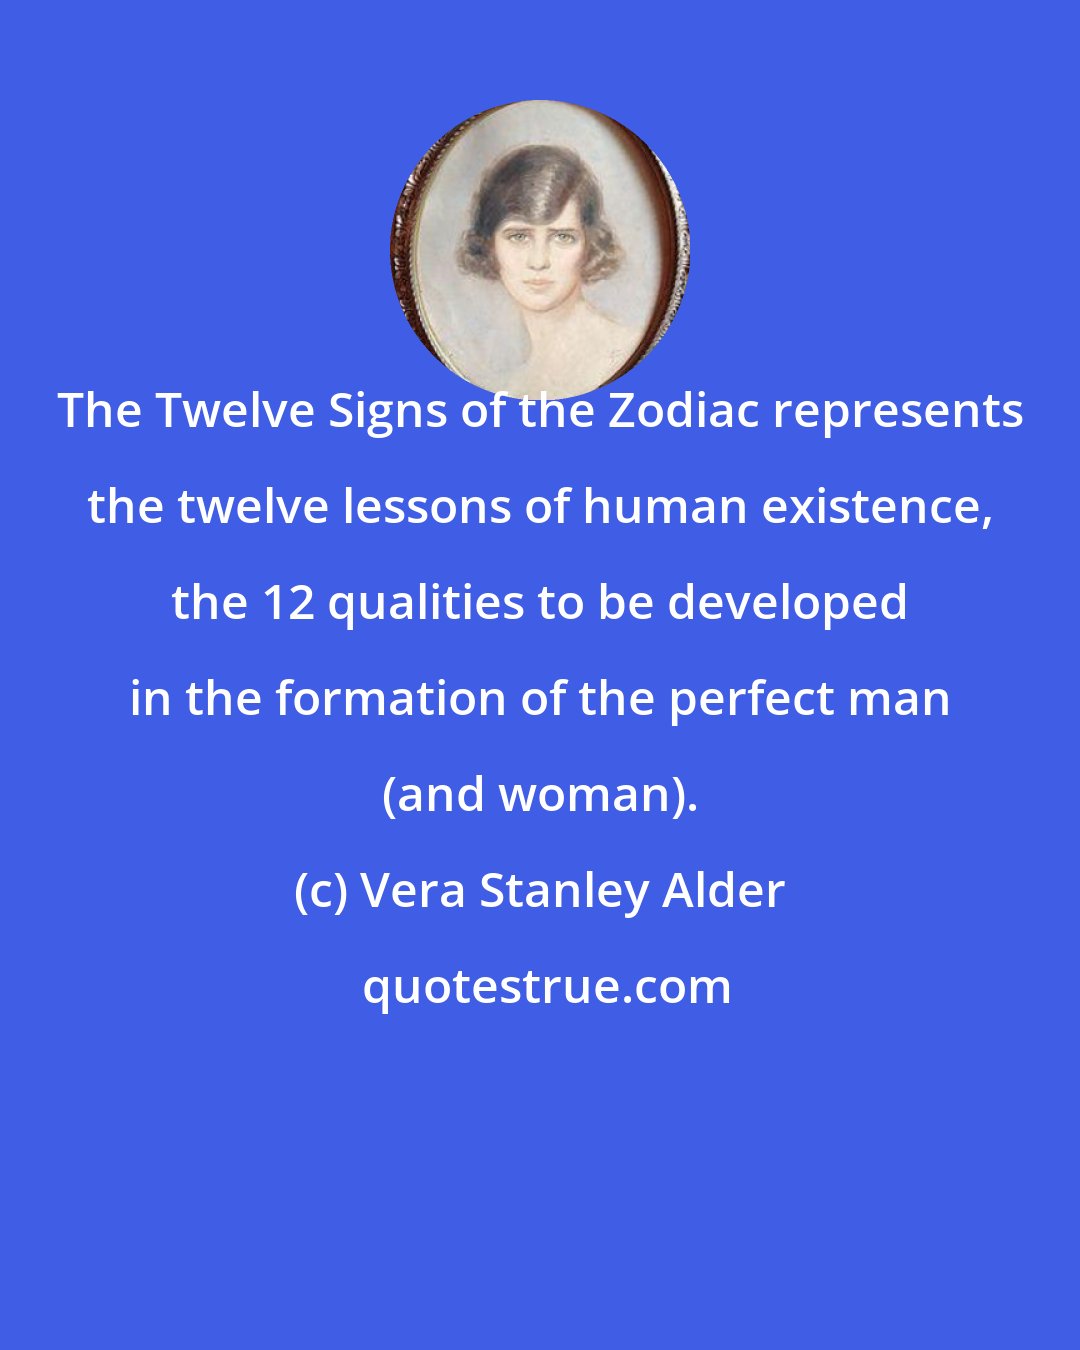 Vera Stanley Alder: The Twelve Signs of the Zodiac represents the twelve lessons of human existence, the 12 qualities to be developed in the formation of the perfect man (and woman).